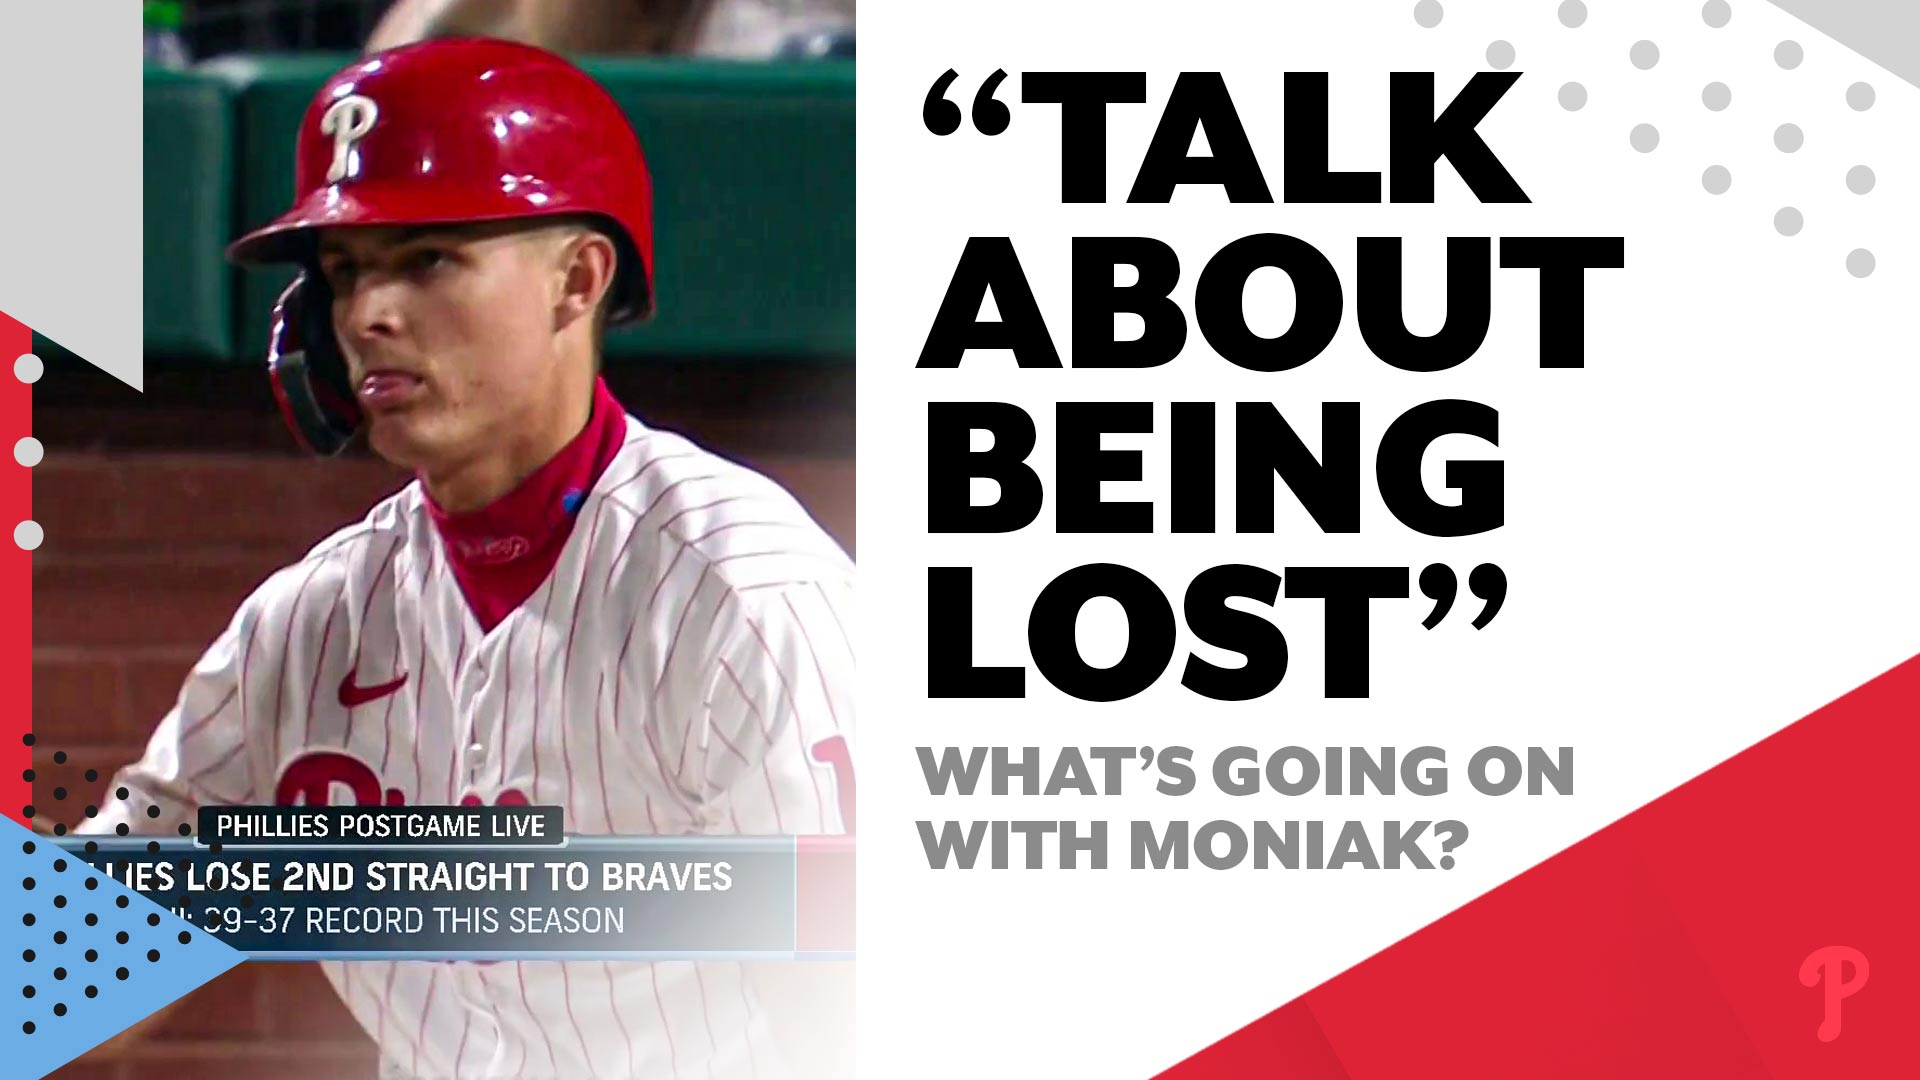 Why is Mickey Moniak struggling so much at the plate?